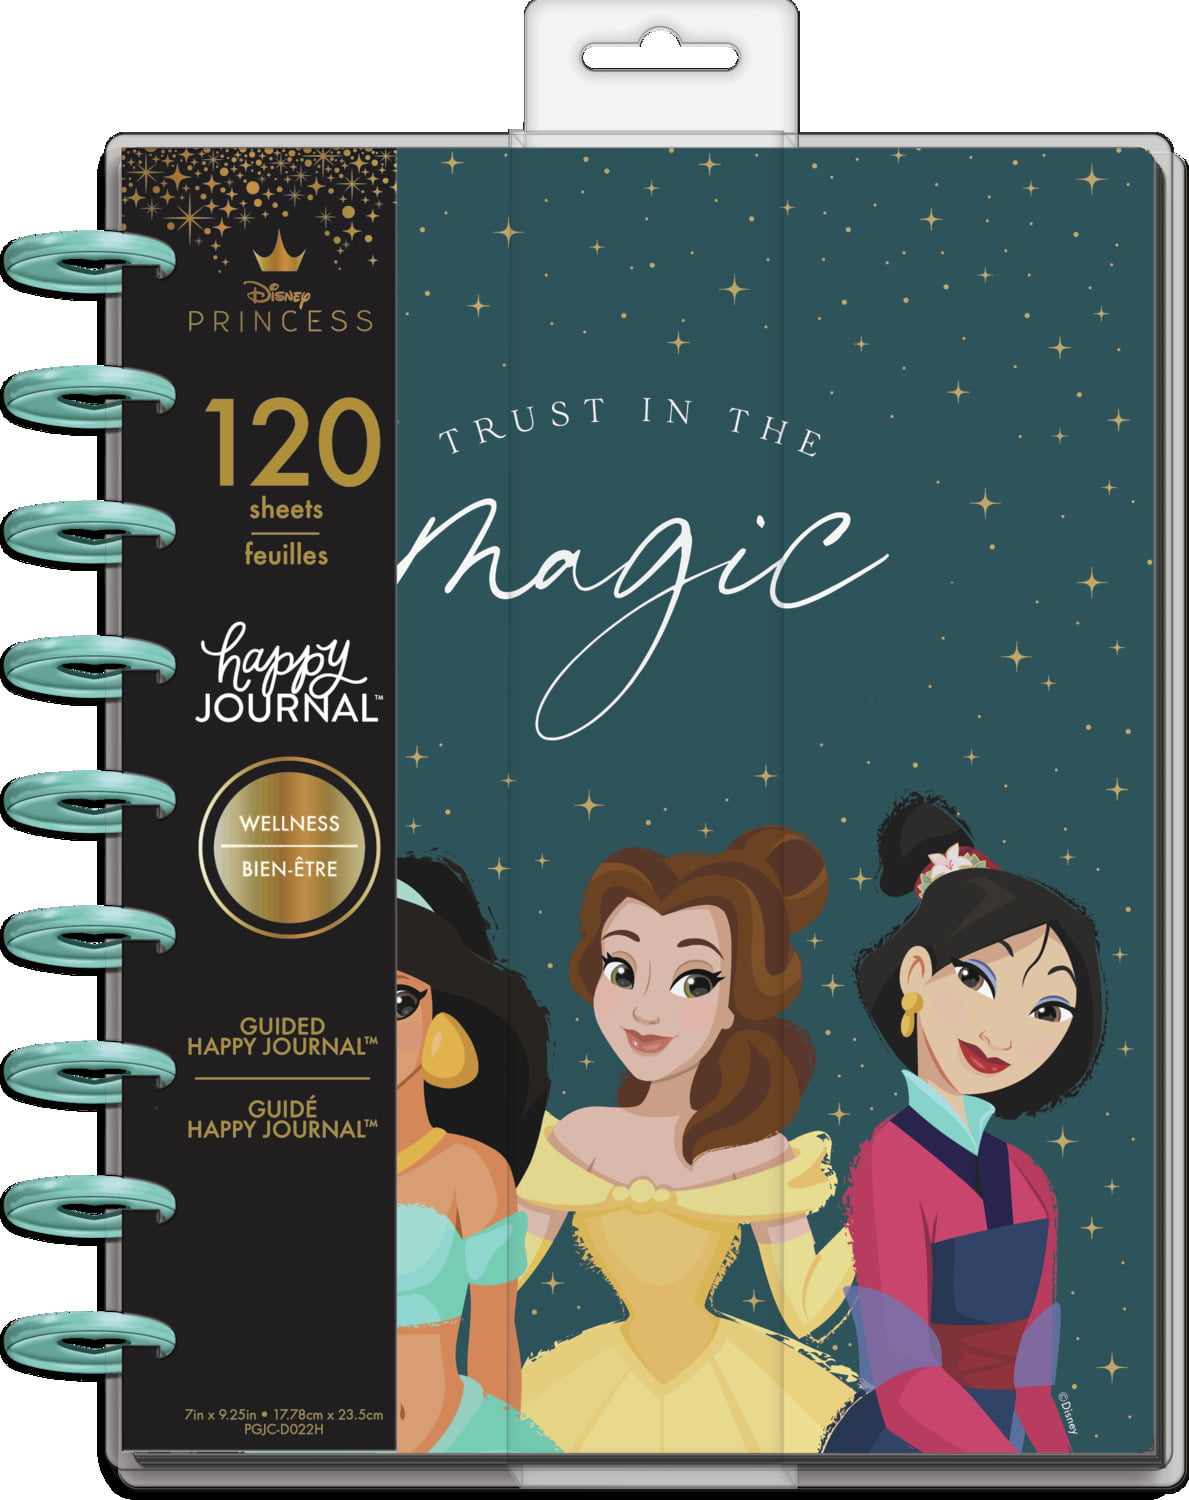 Write In Your Own Dates Disney Princess Guided Happy Journal The Happy Journal 